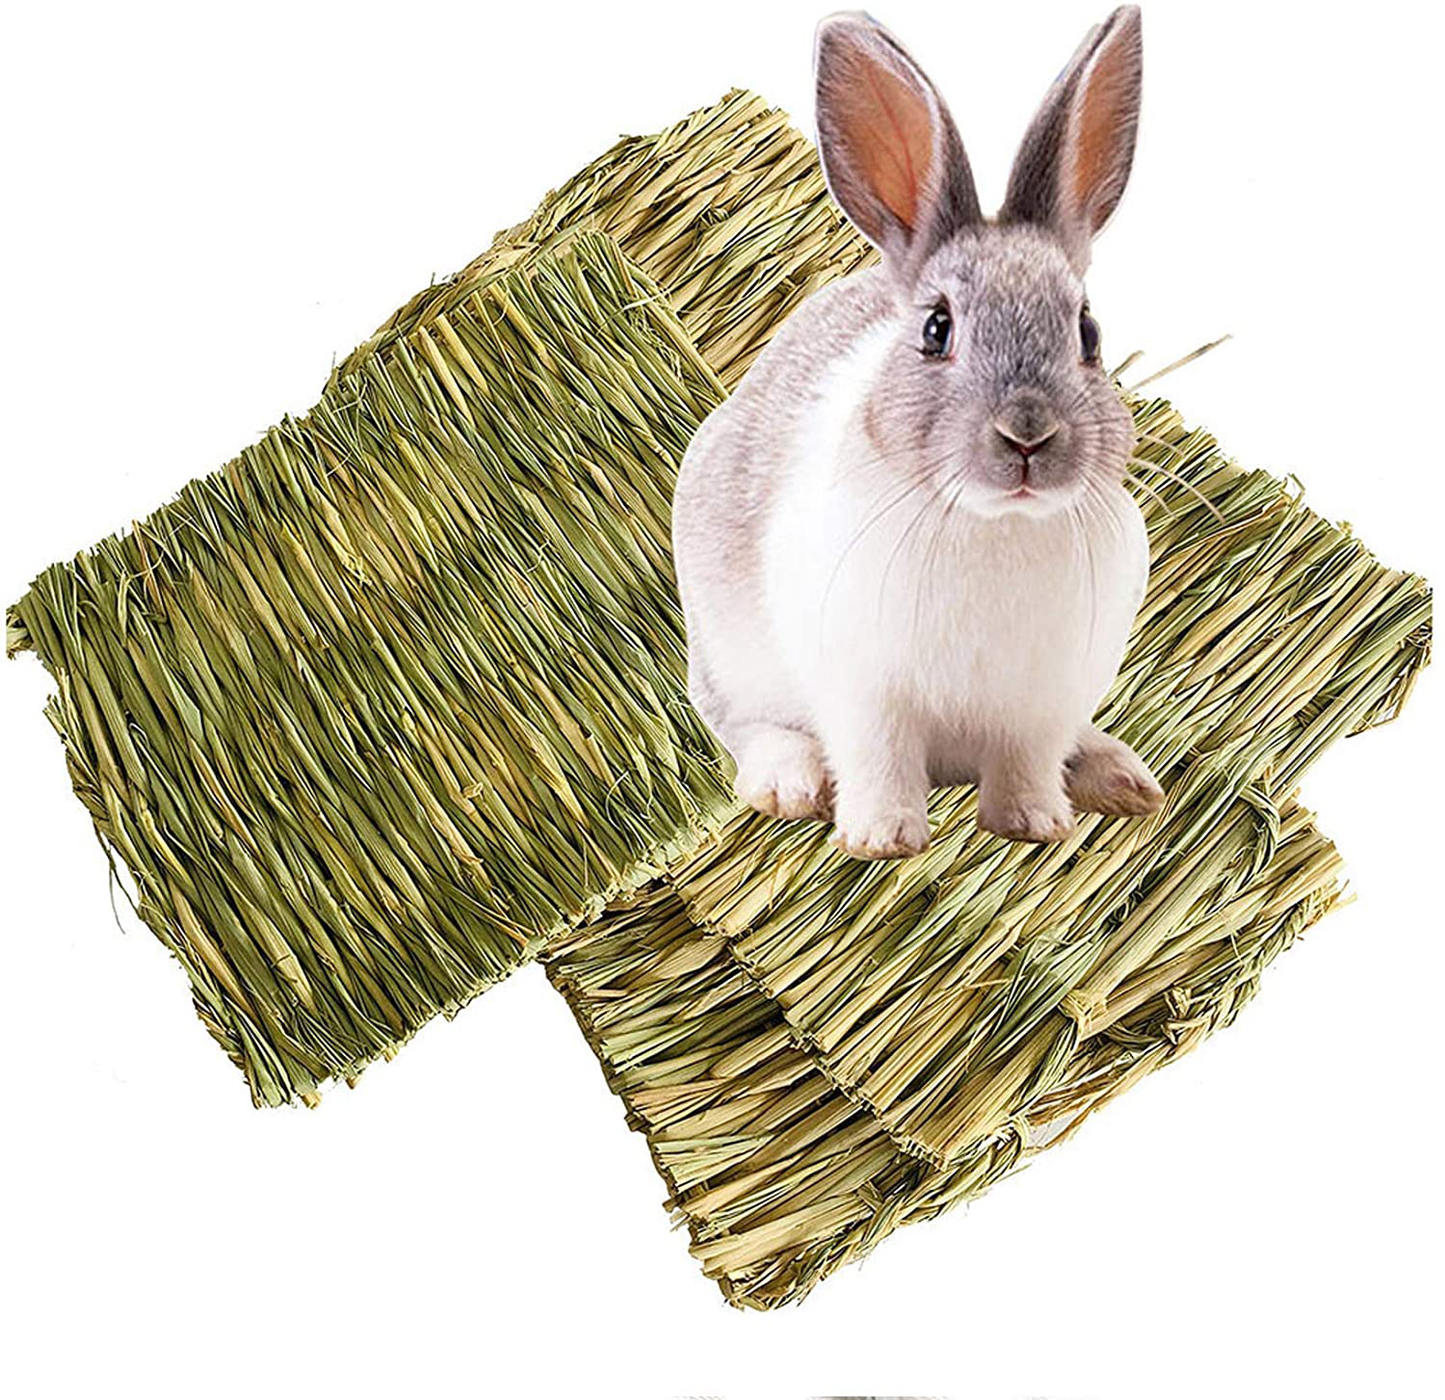 Hamiledyi Rabbit Bunny Grass Mat,3 Pack Hamster Mat Natural Straw Woven Bed Mat Bunny Bedding Nest Chew Toy for Small Animal Guinea Pig Parrot Rat